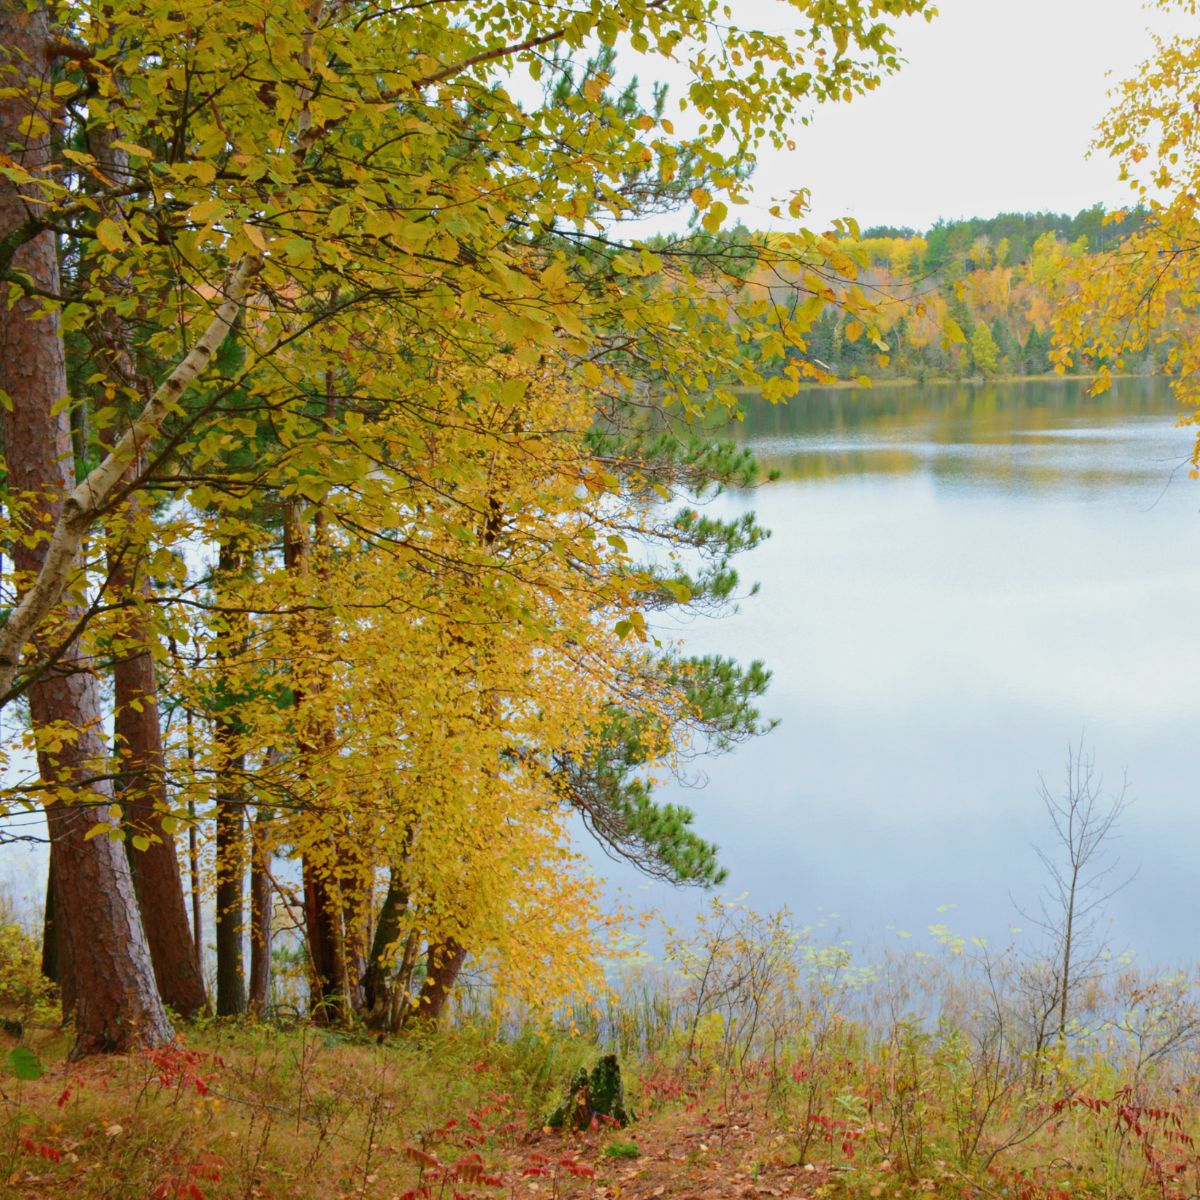 Autumn Leaves in Itasca State Park